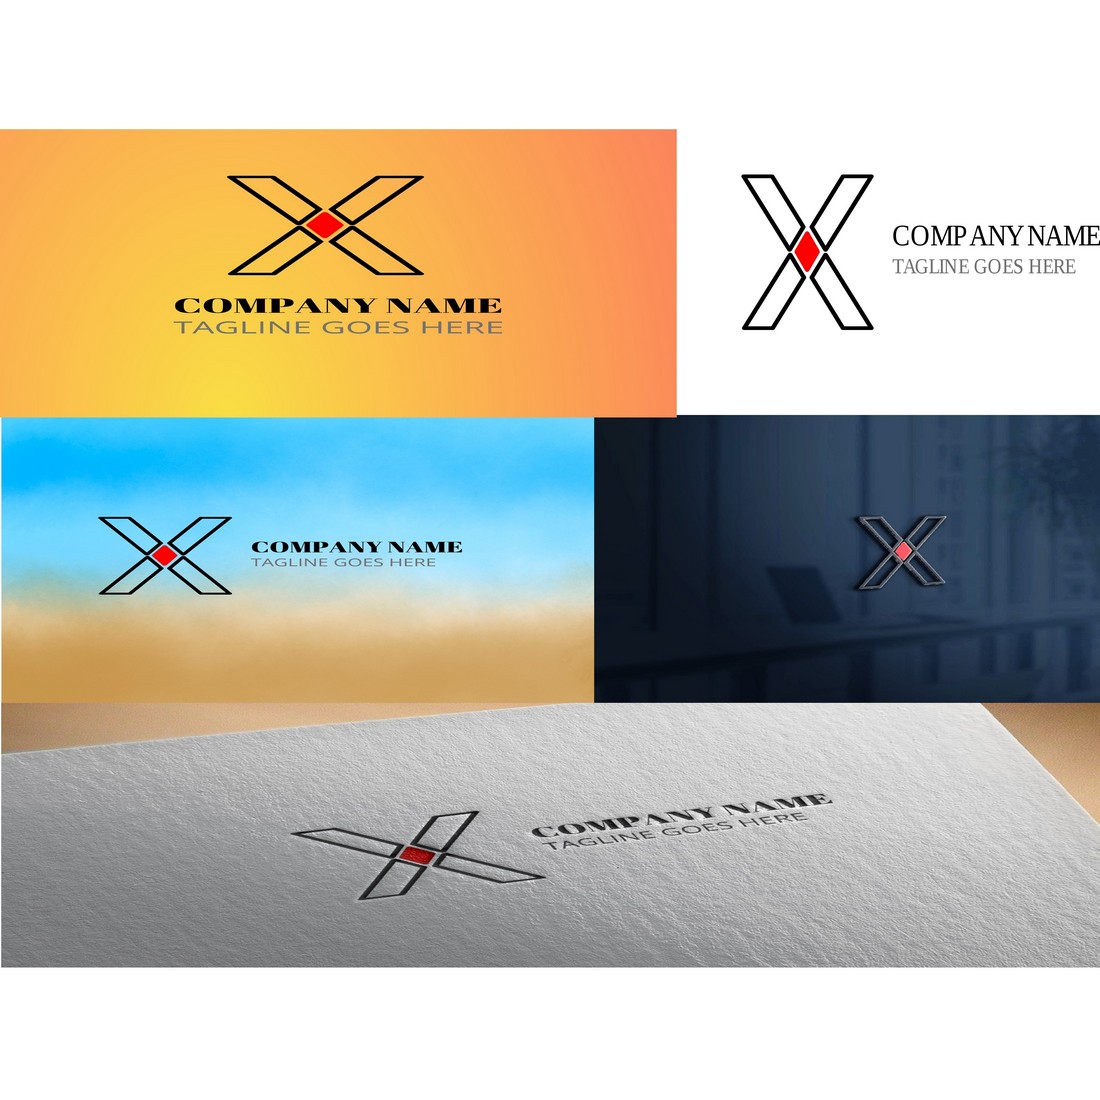 X Letter Logo Template cover image.